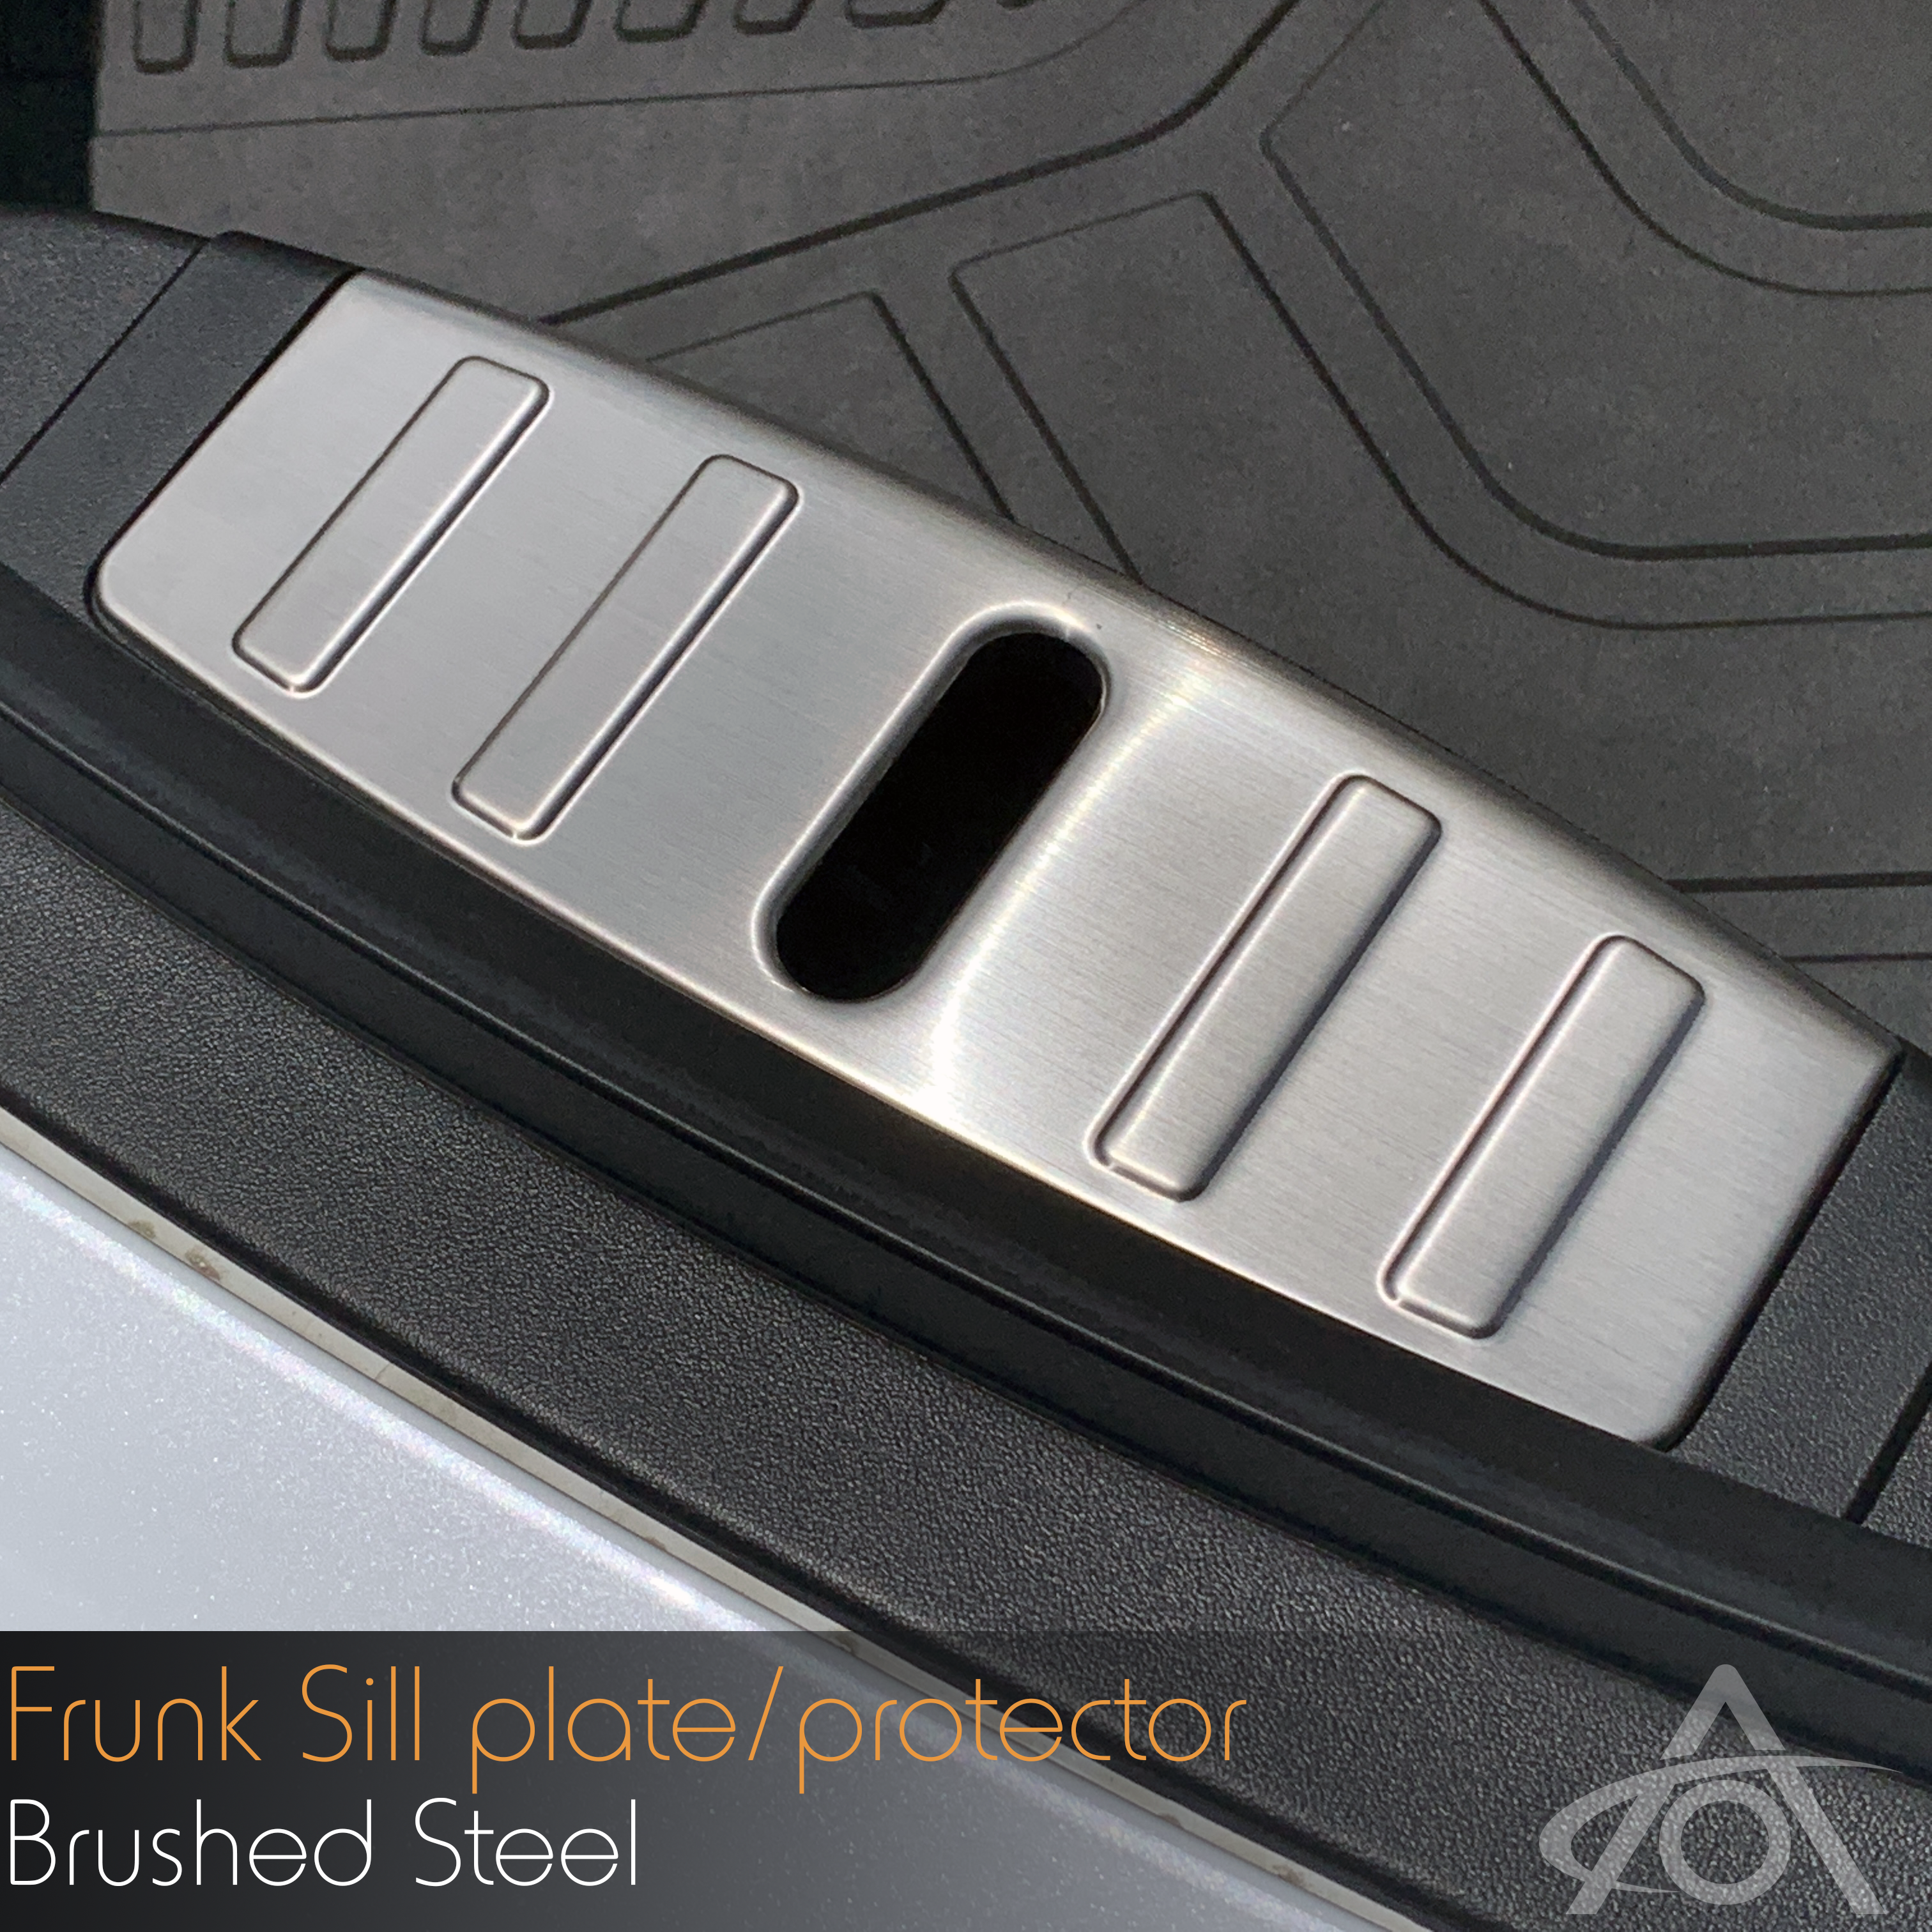 Frunk sill protector in Brushed Steel